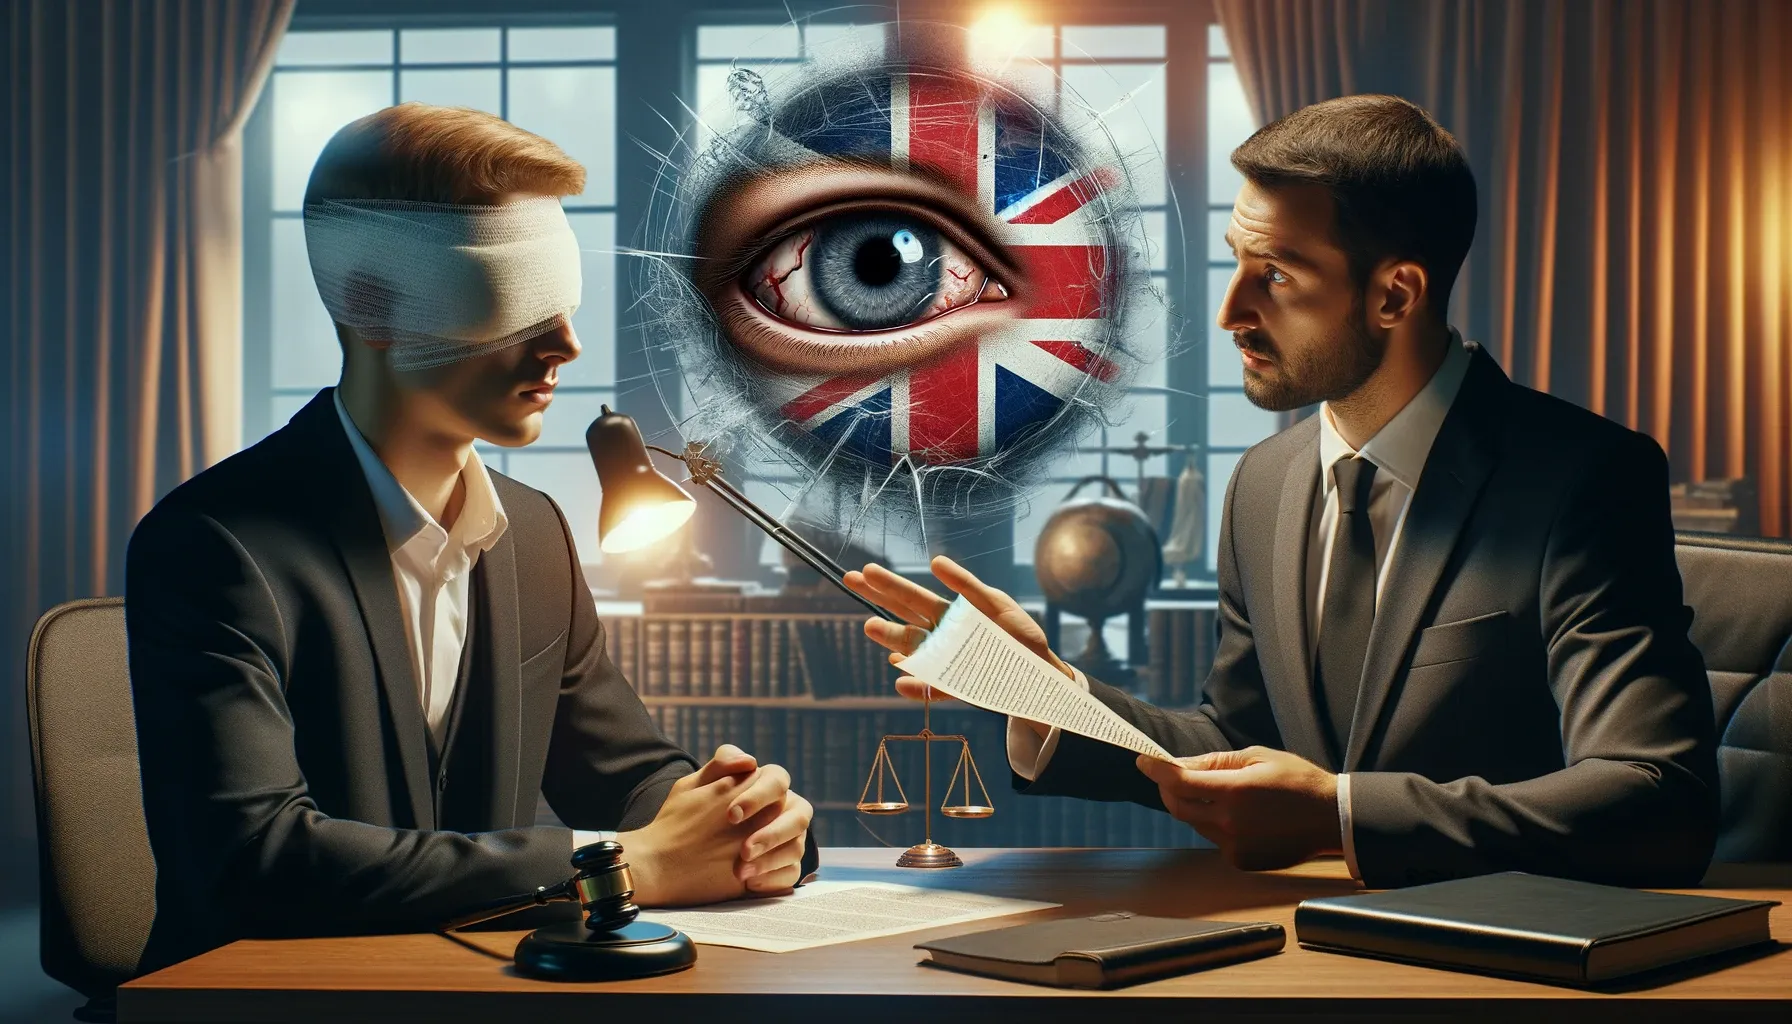 Car accident compensation for eye injury in the UK